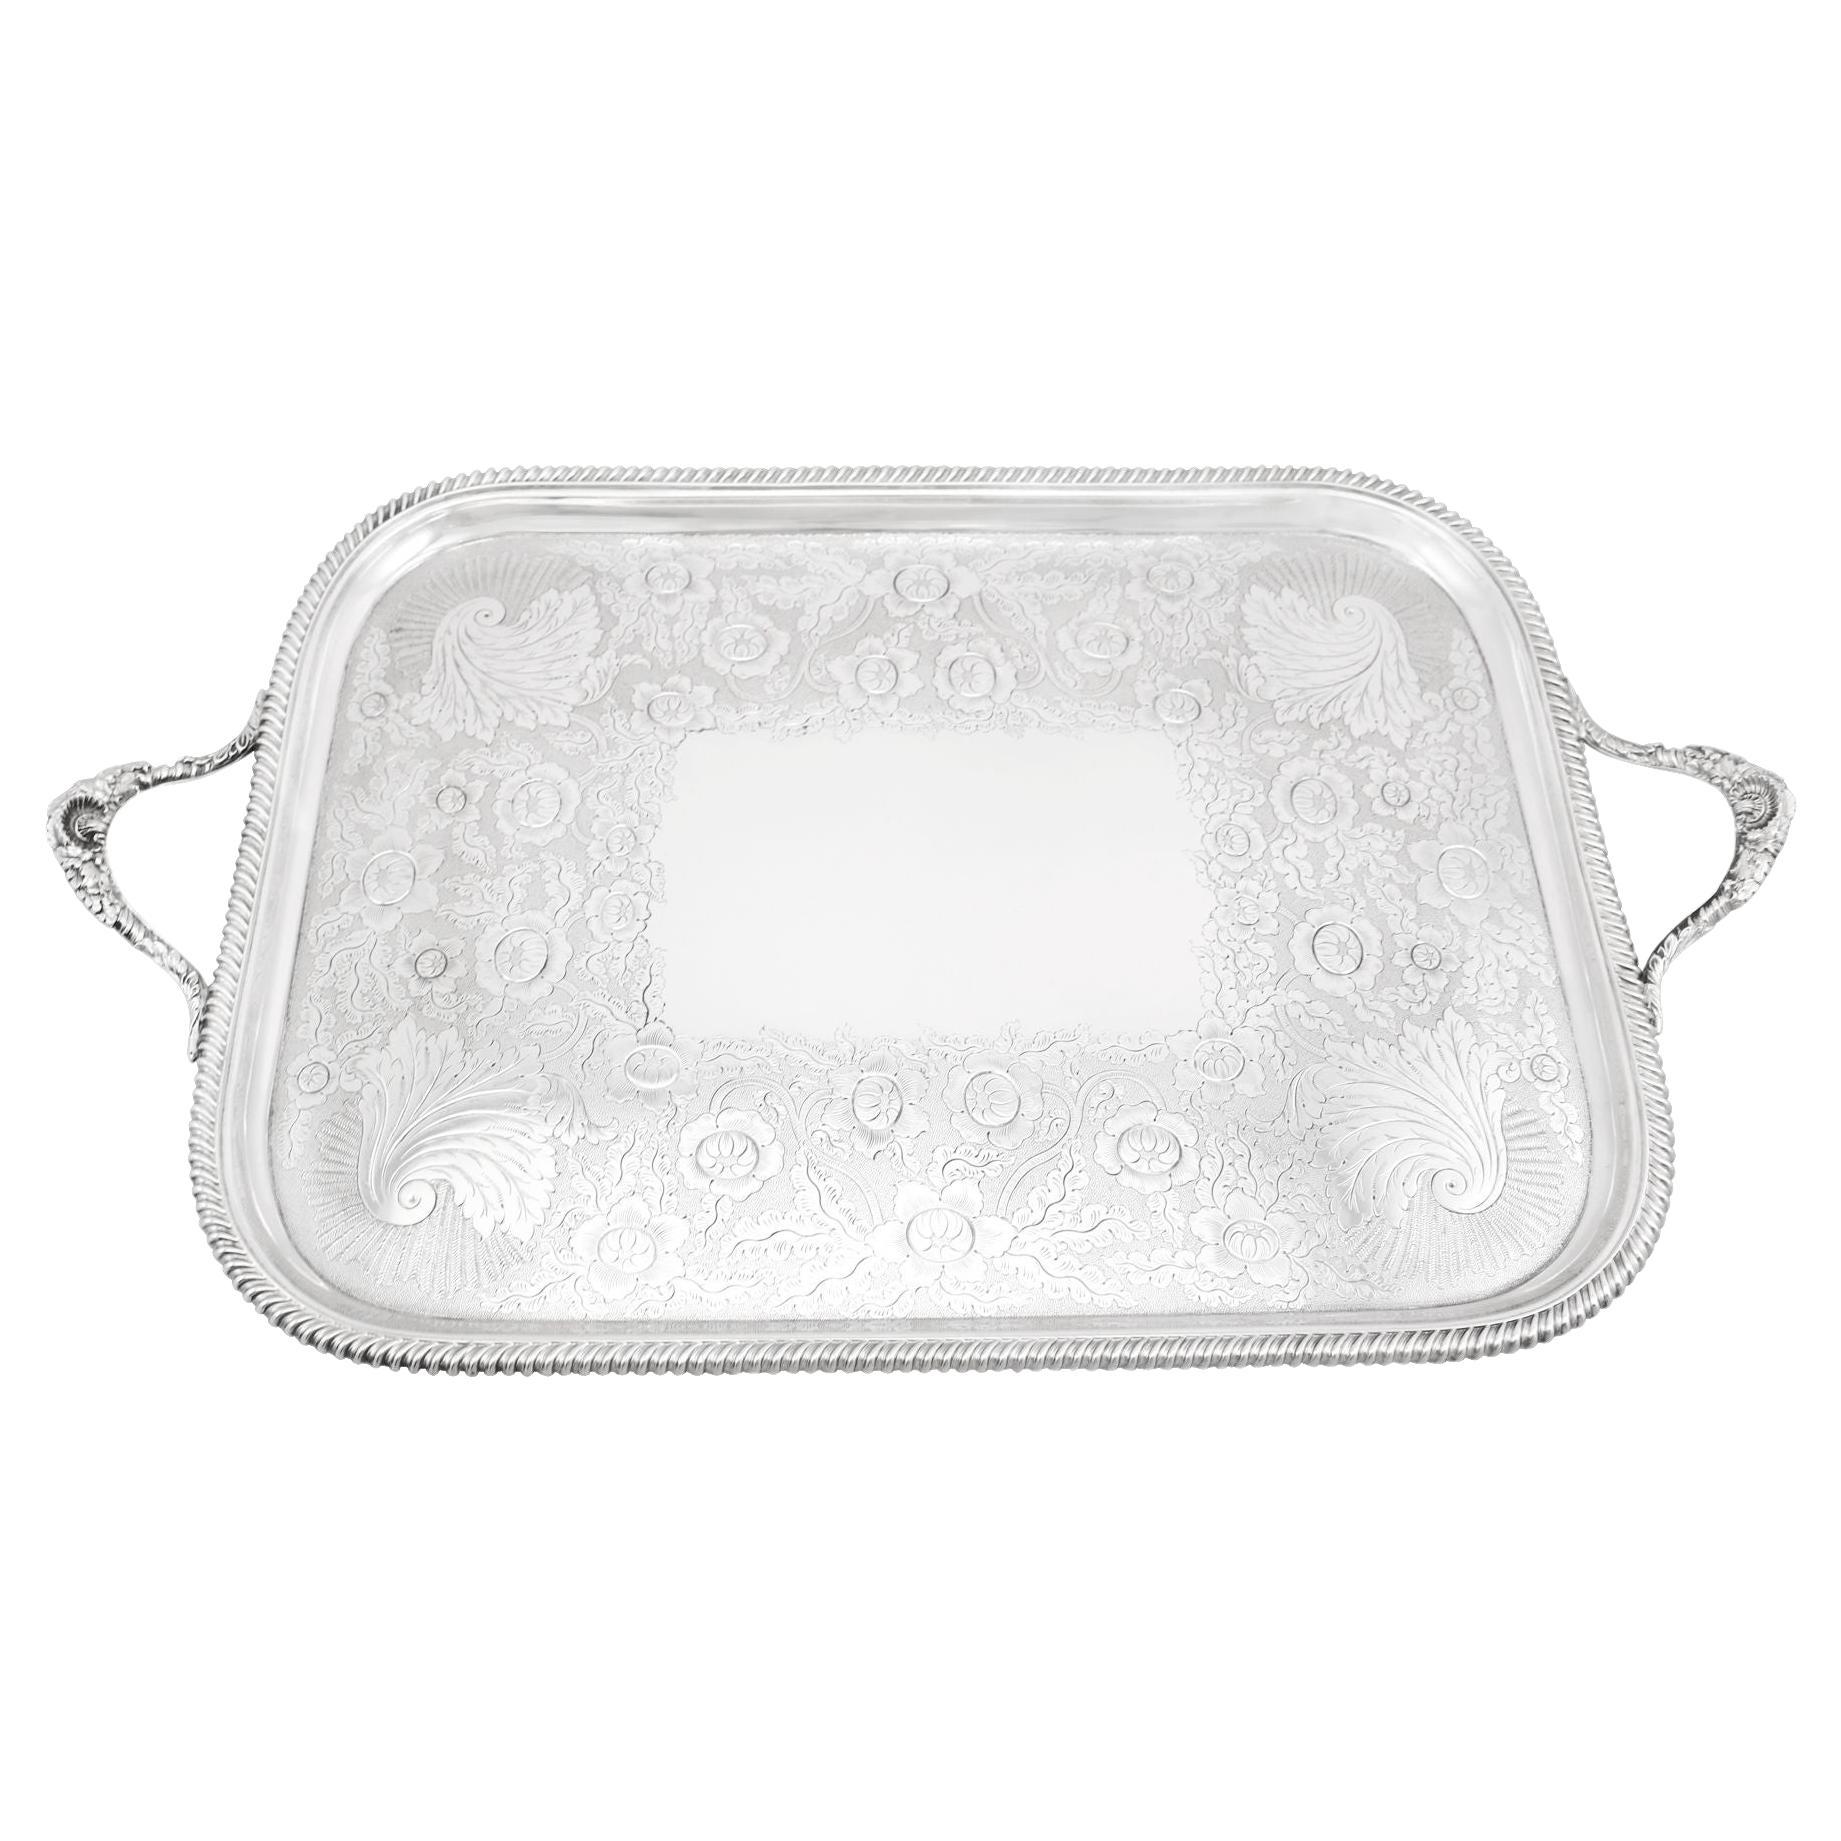 What are silver platters made of?